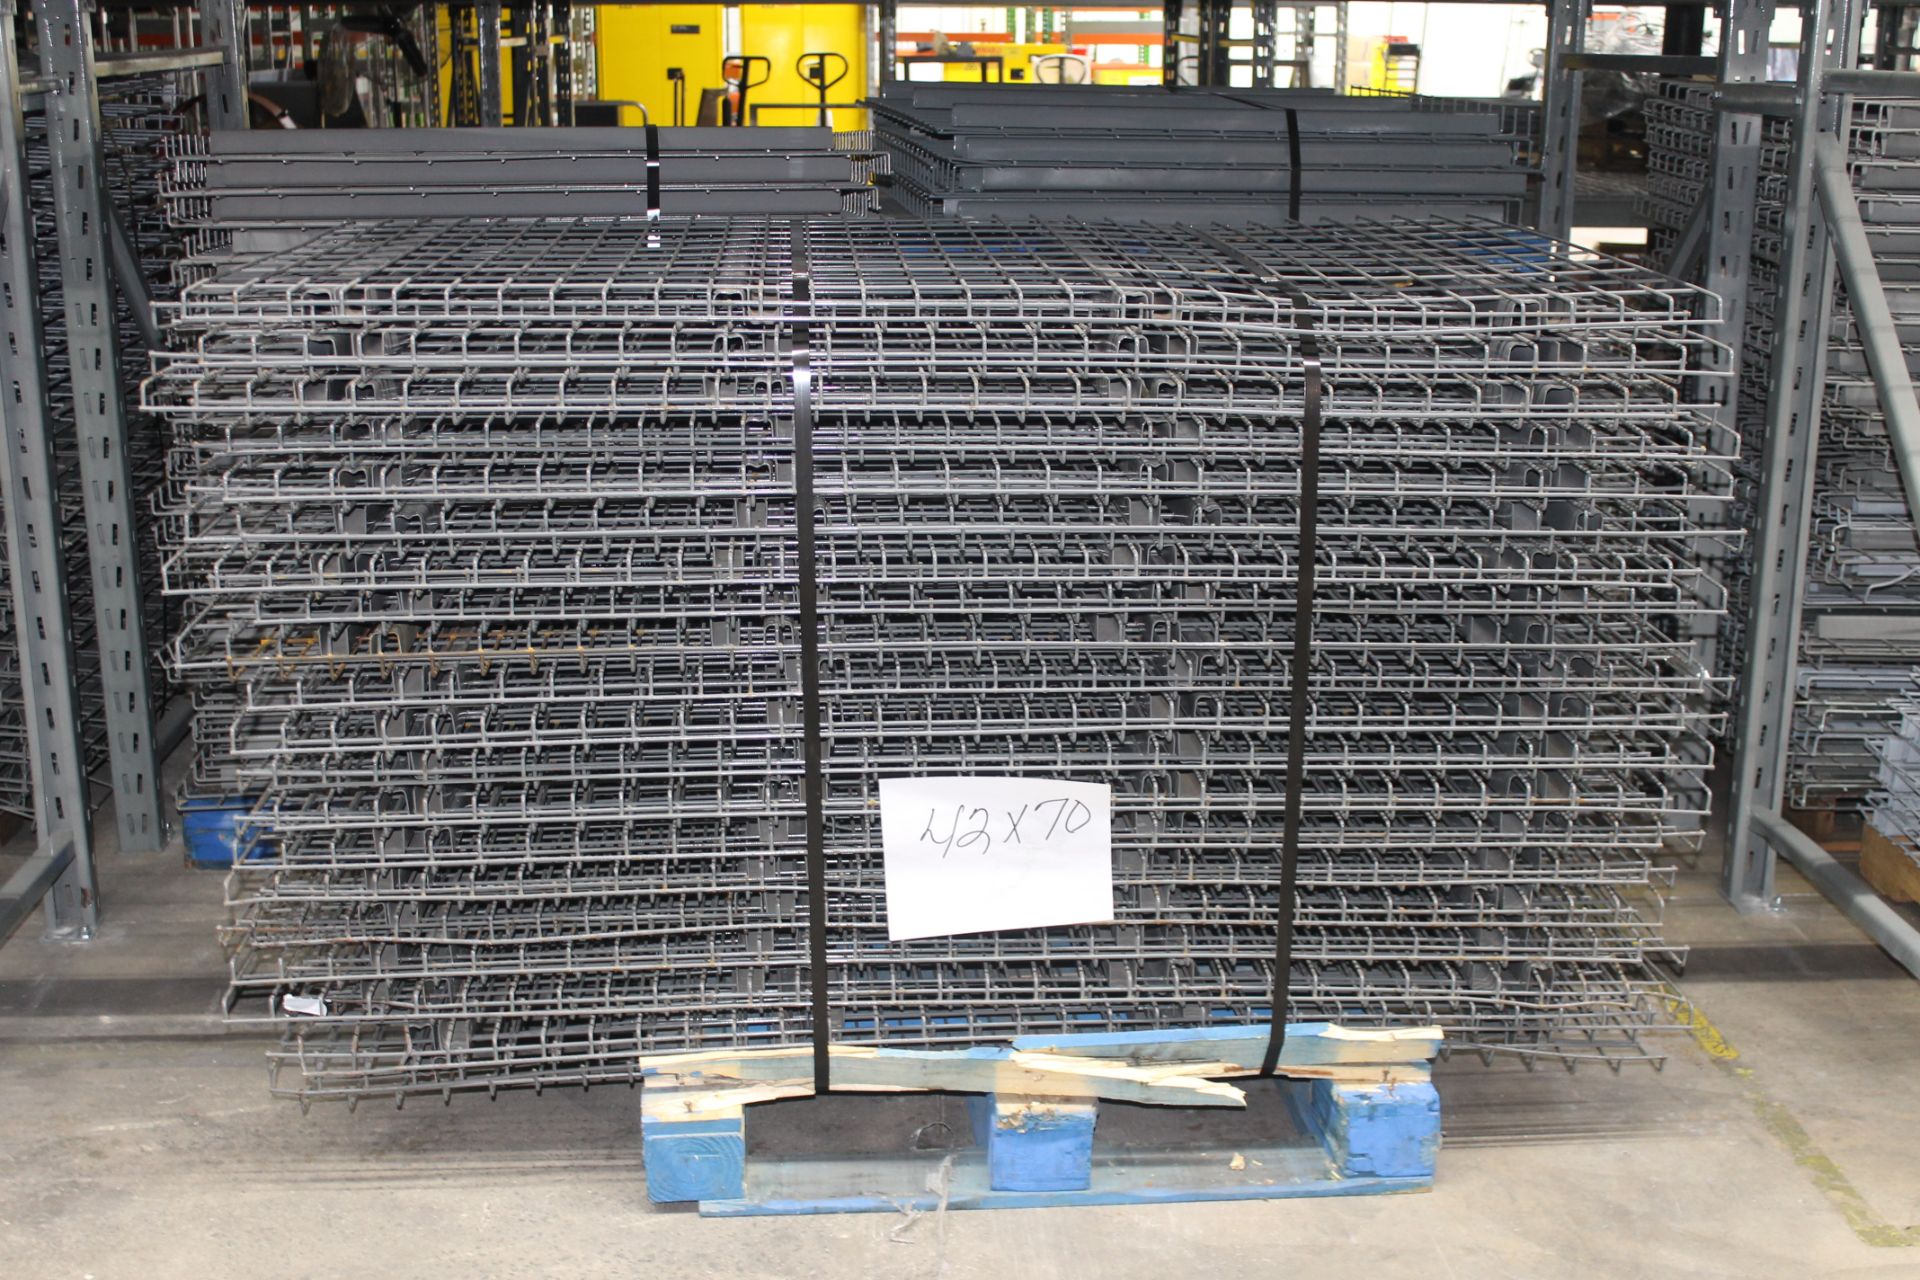 56 BAYS OF TEARDROP STYLE PALLET RACK, LIKE NEW, SIZE: 16'H x 42"D X 117"W, (3" X 3" POST) - Image 3 of 6